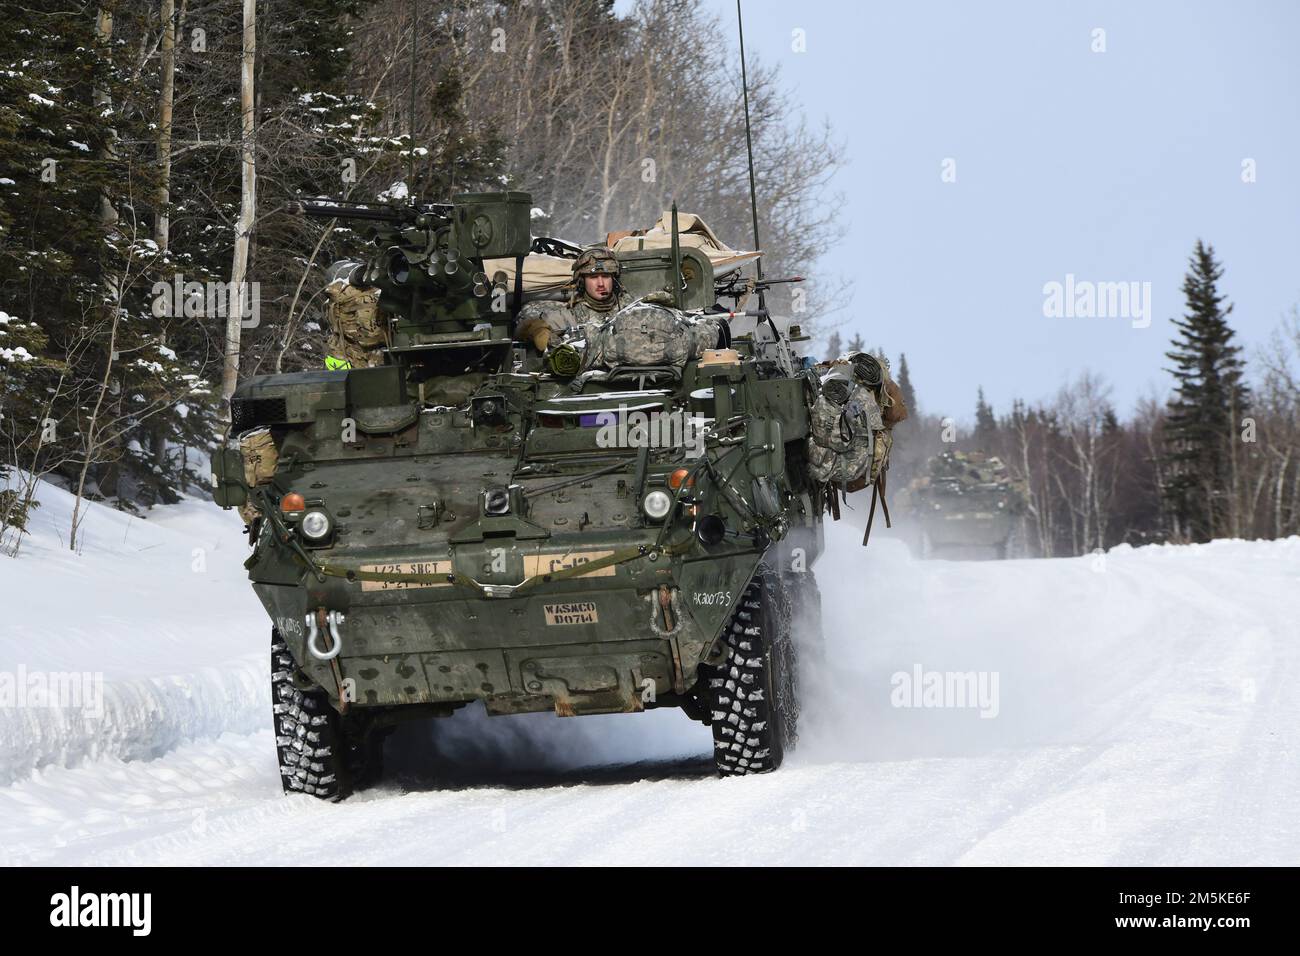 Stryker vehicles from the 3rd Battalion, 21st Infantry Regiment move down a snowy road in the Donnelly Training Area during Joint Pacific Multinational Readiness Center 22-02, March 22, 2022. This exercise is designed to validate U.S. Army Alaska’s 1st Stryker Brigade Combat Team, 25th Infantry Division’s cold weather training, readiness and capabilities.  (Army photo/John Pennell) Stock Photo